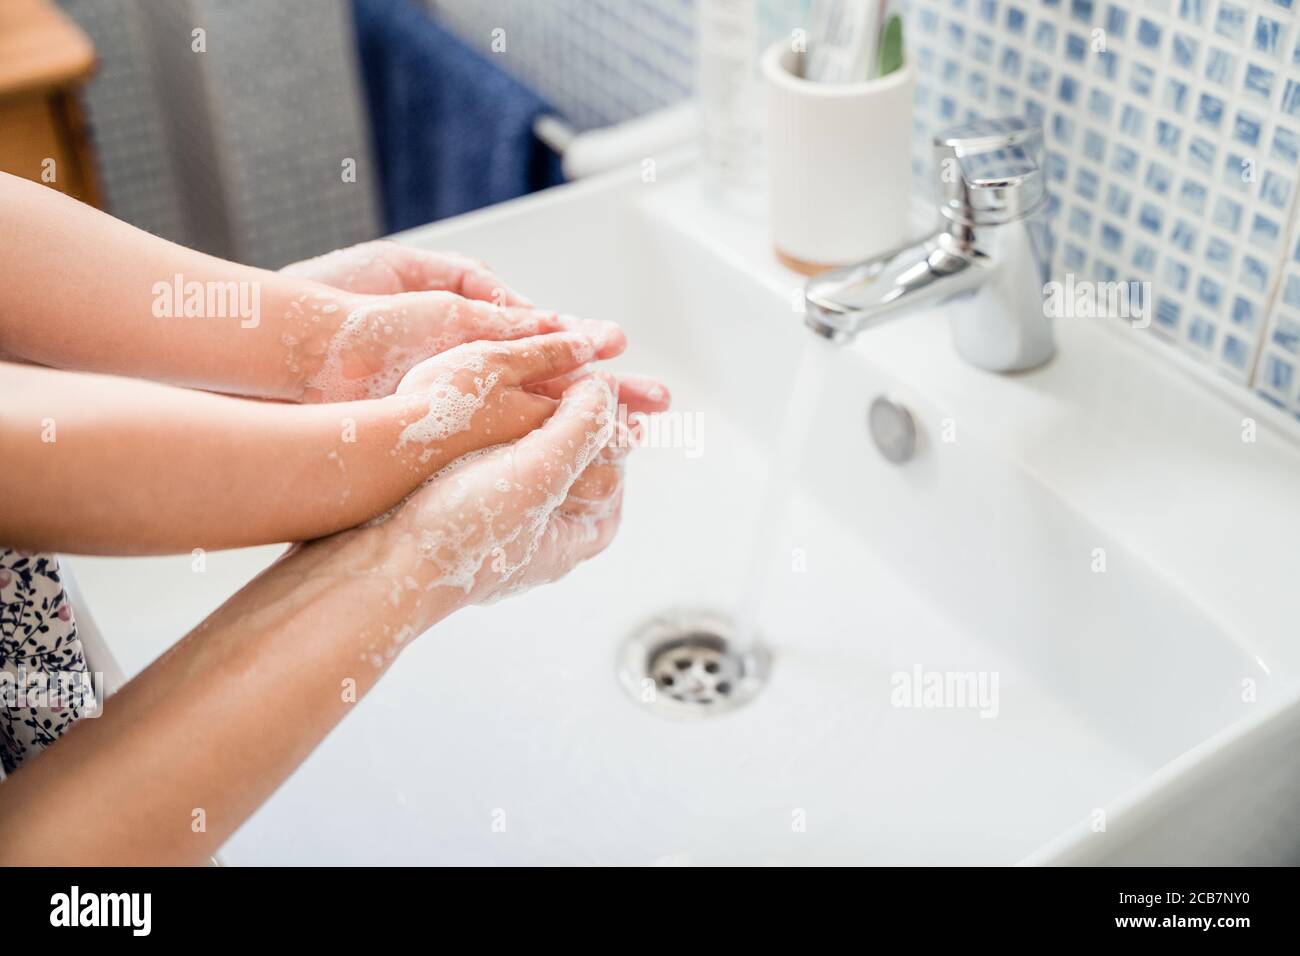 Mother and girl child washing hands together in bathroom sink with lots of soap under running water tap. Holding hands Stock Photo